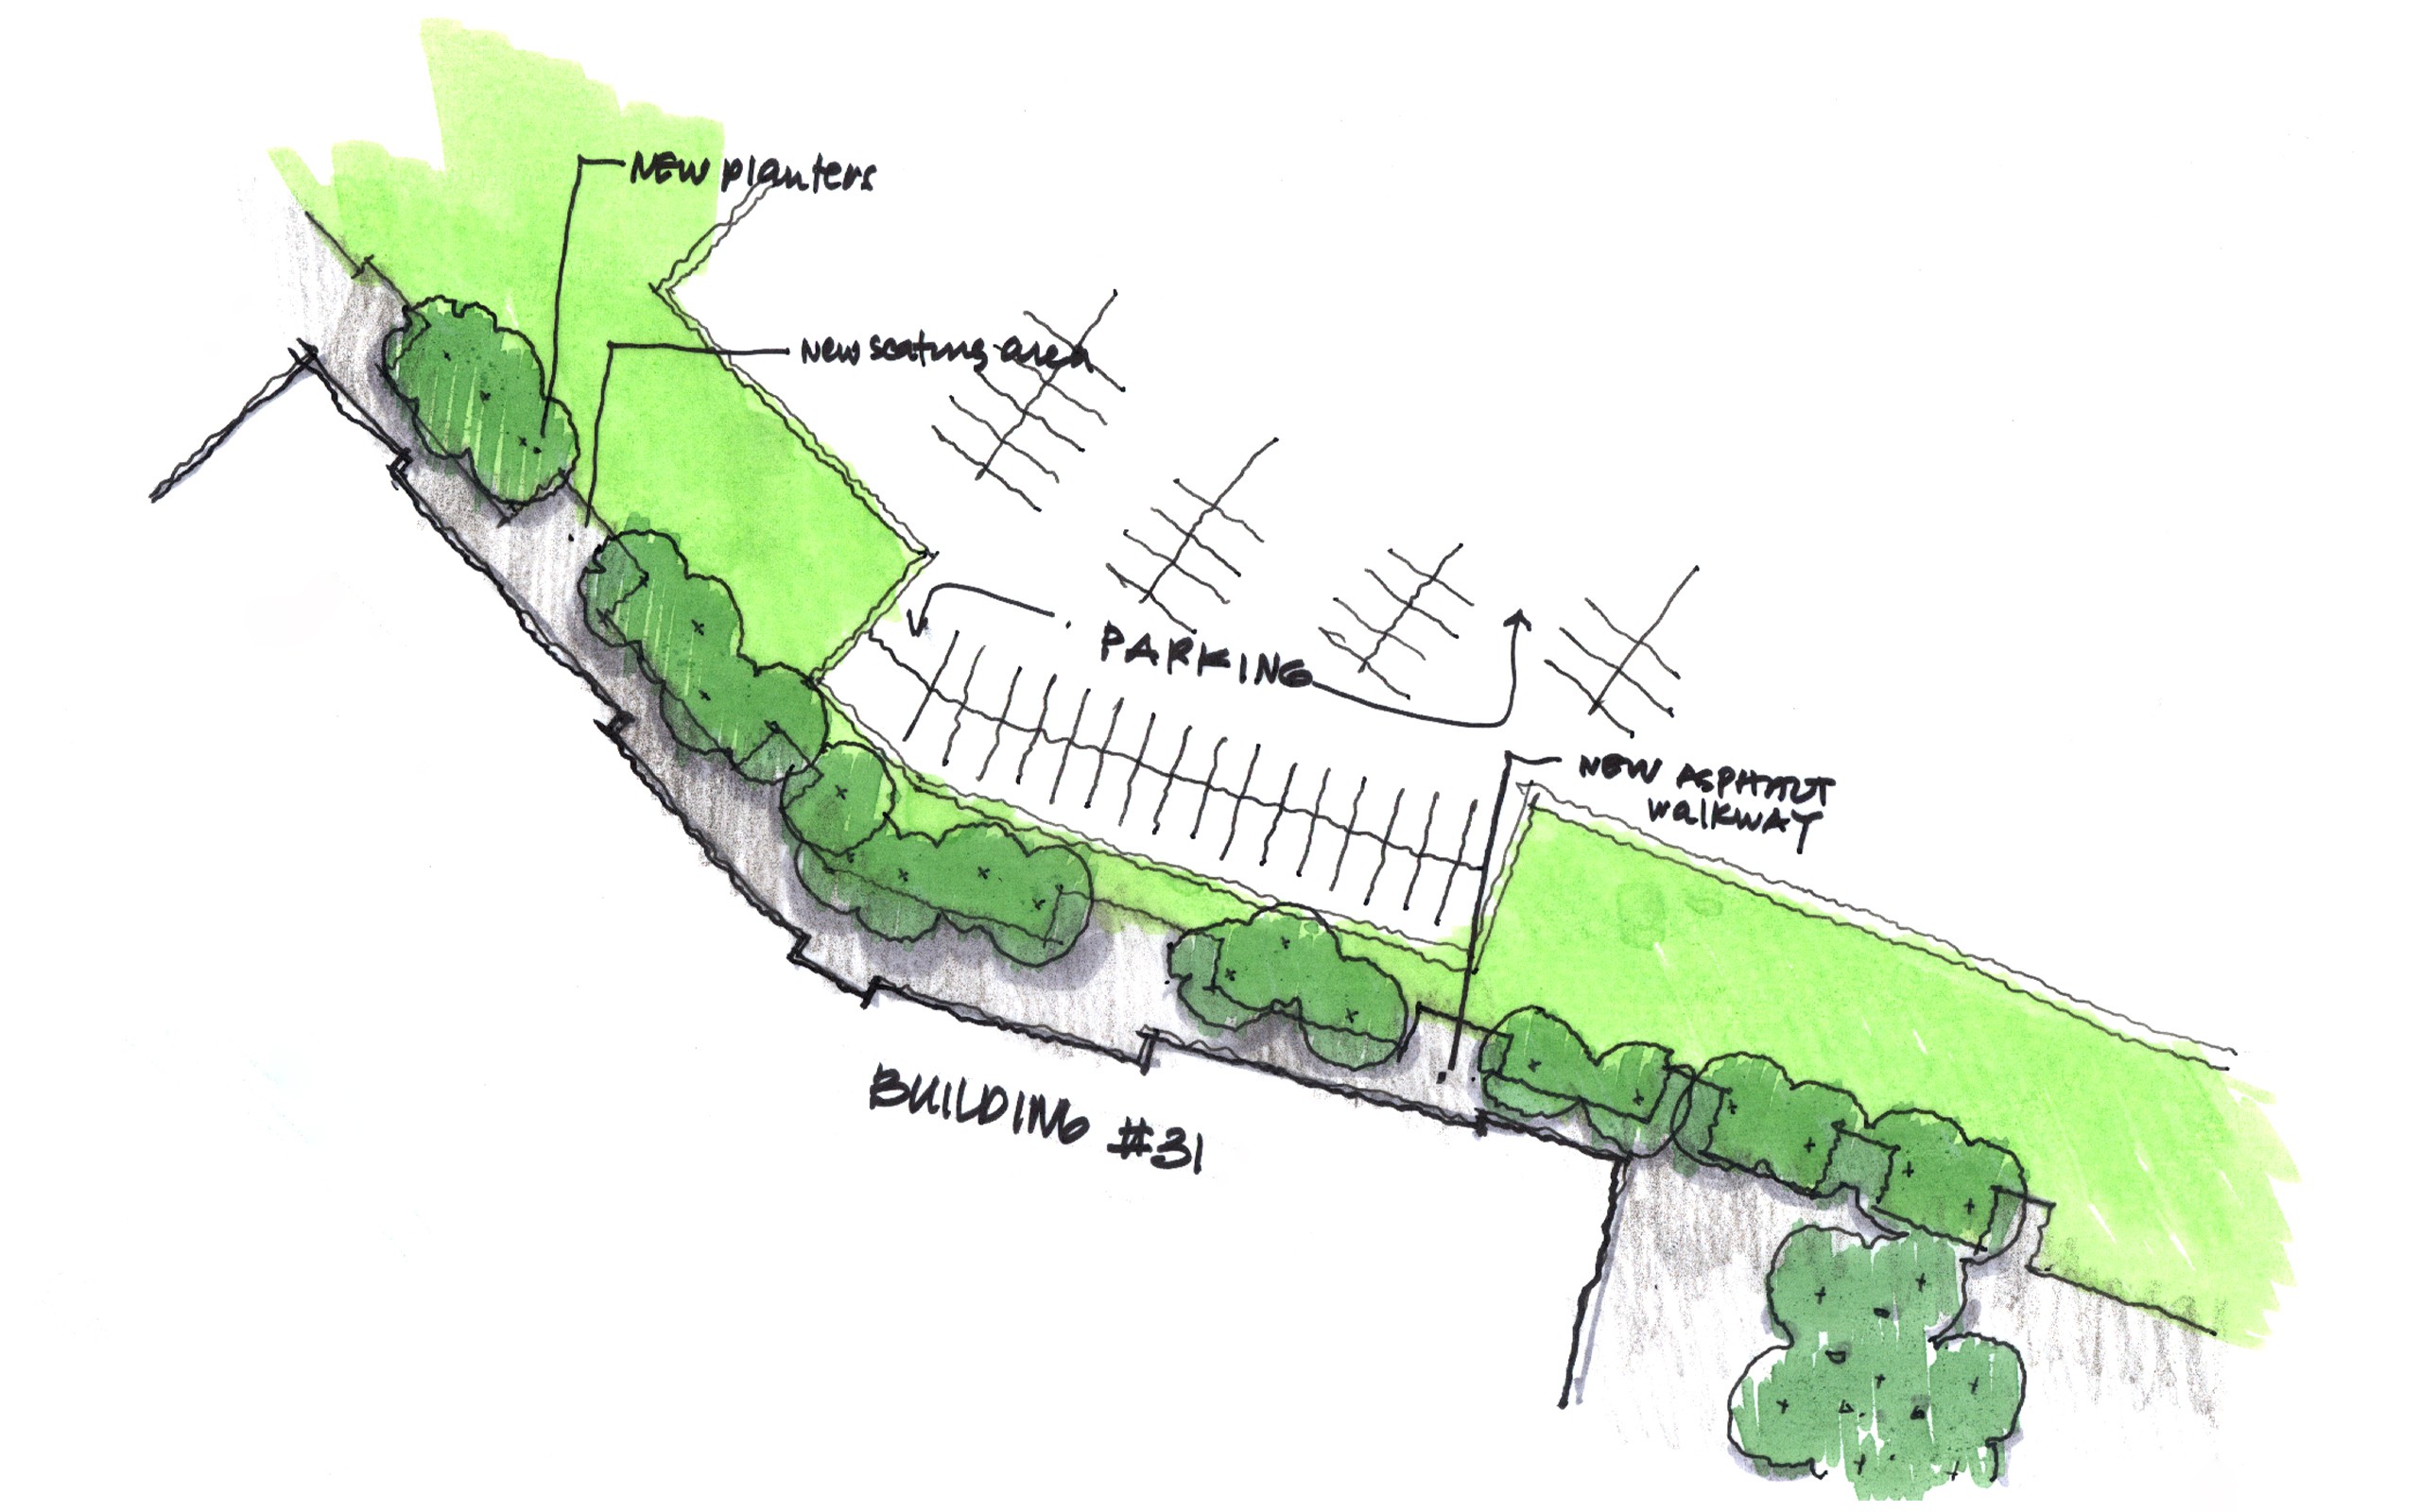 Sketched diagram of green space alongside a parking lot